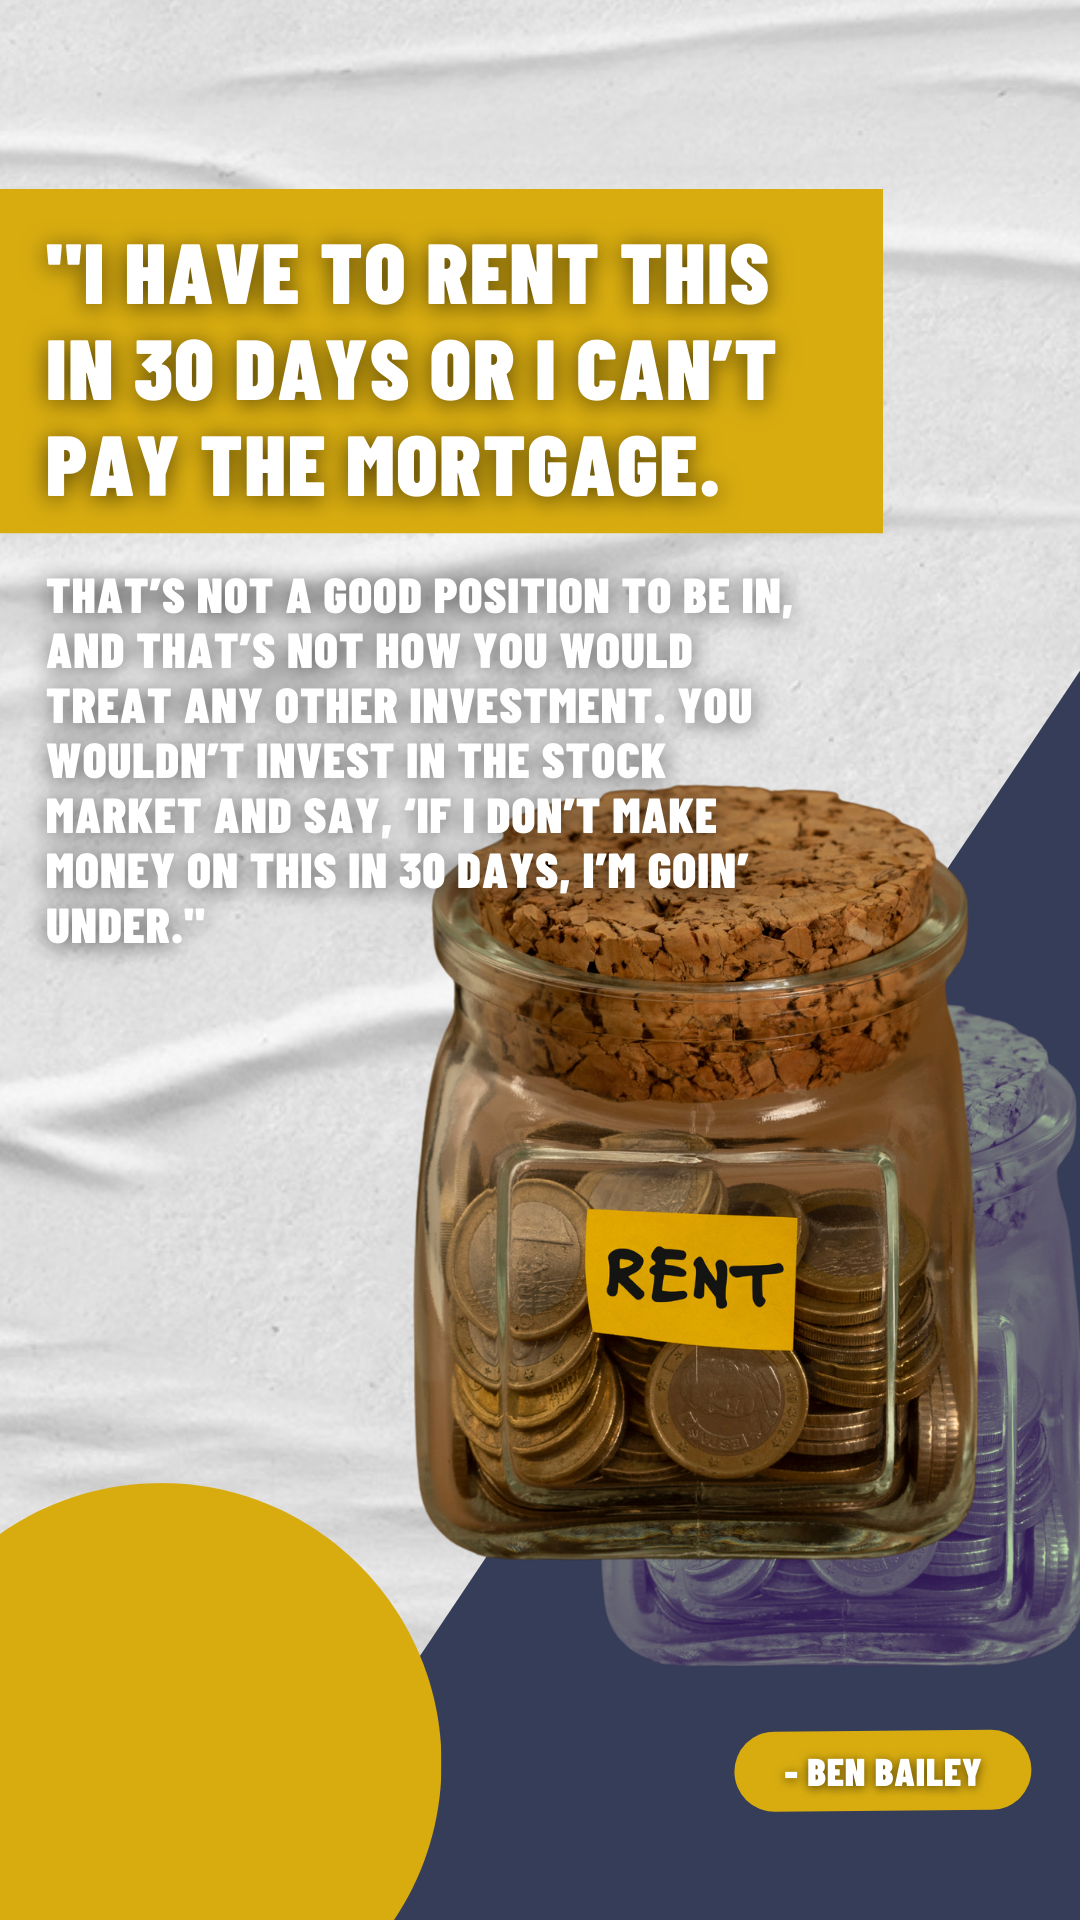 Quote 2_I have to rent this_Ep 15_Investment Properties (Instagram Story)